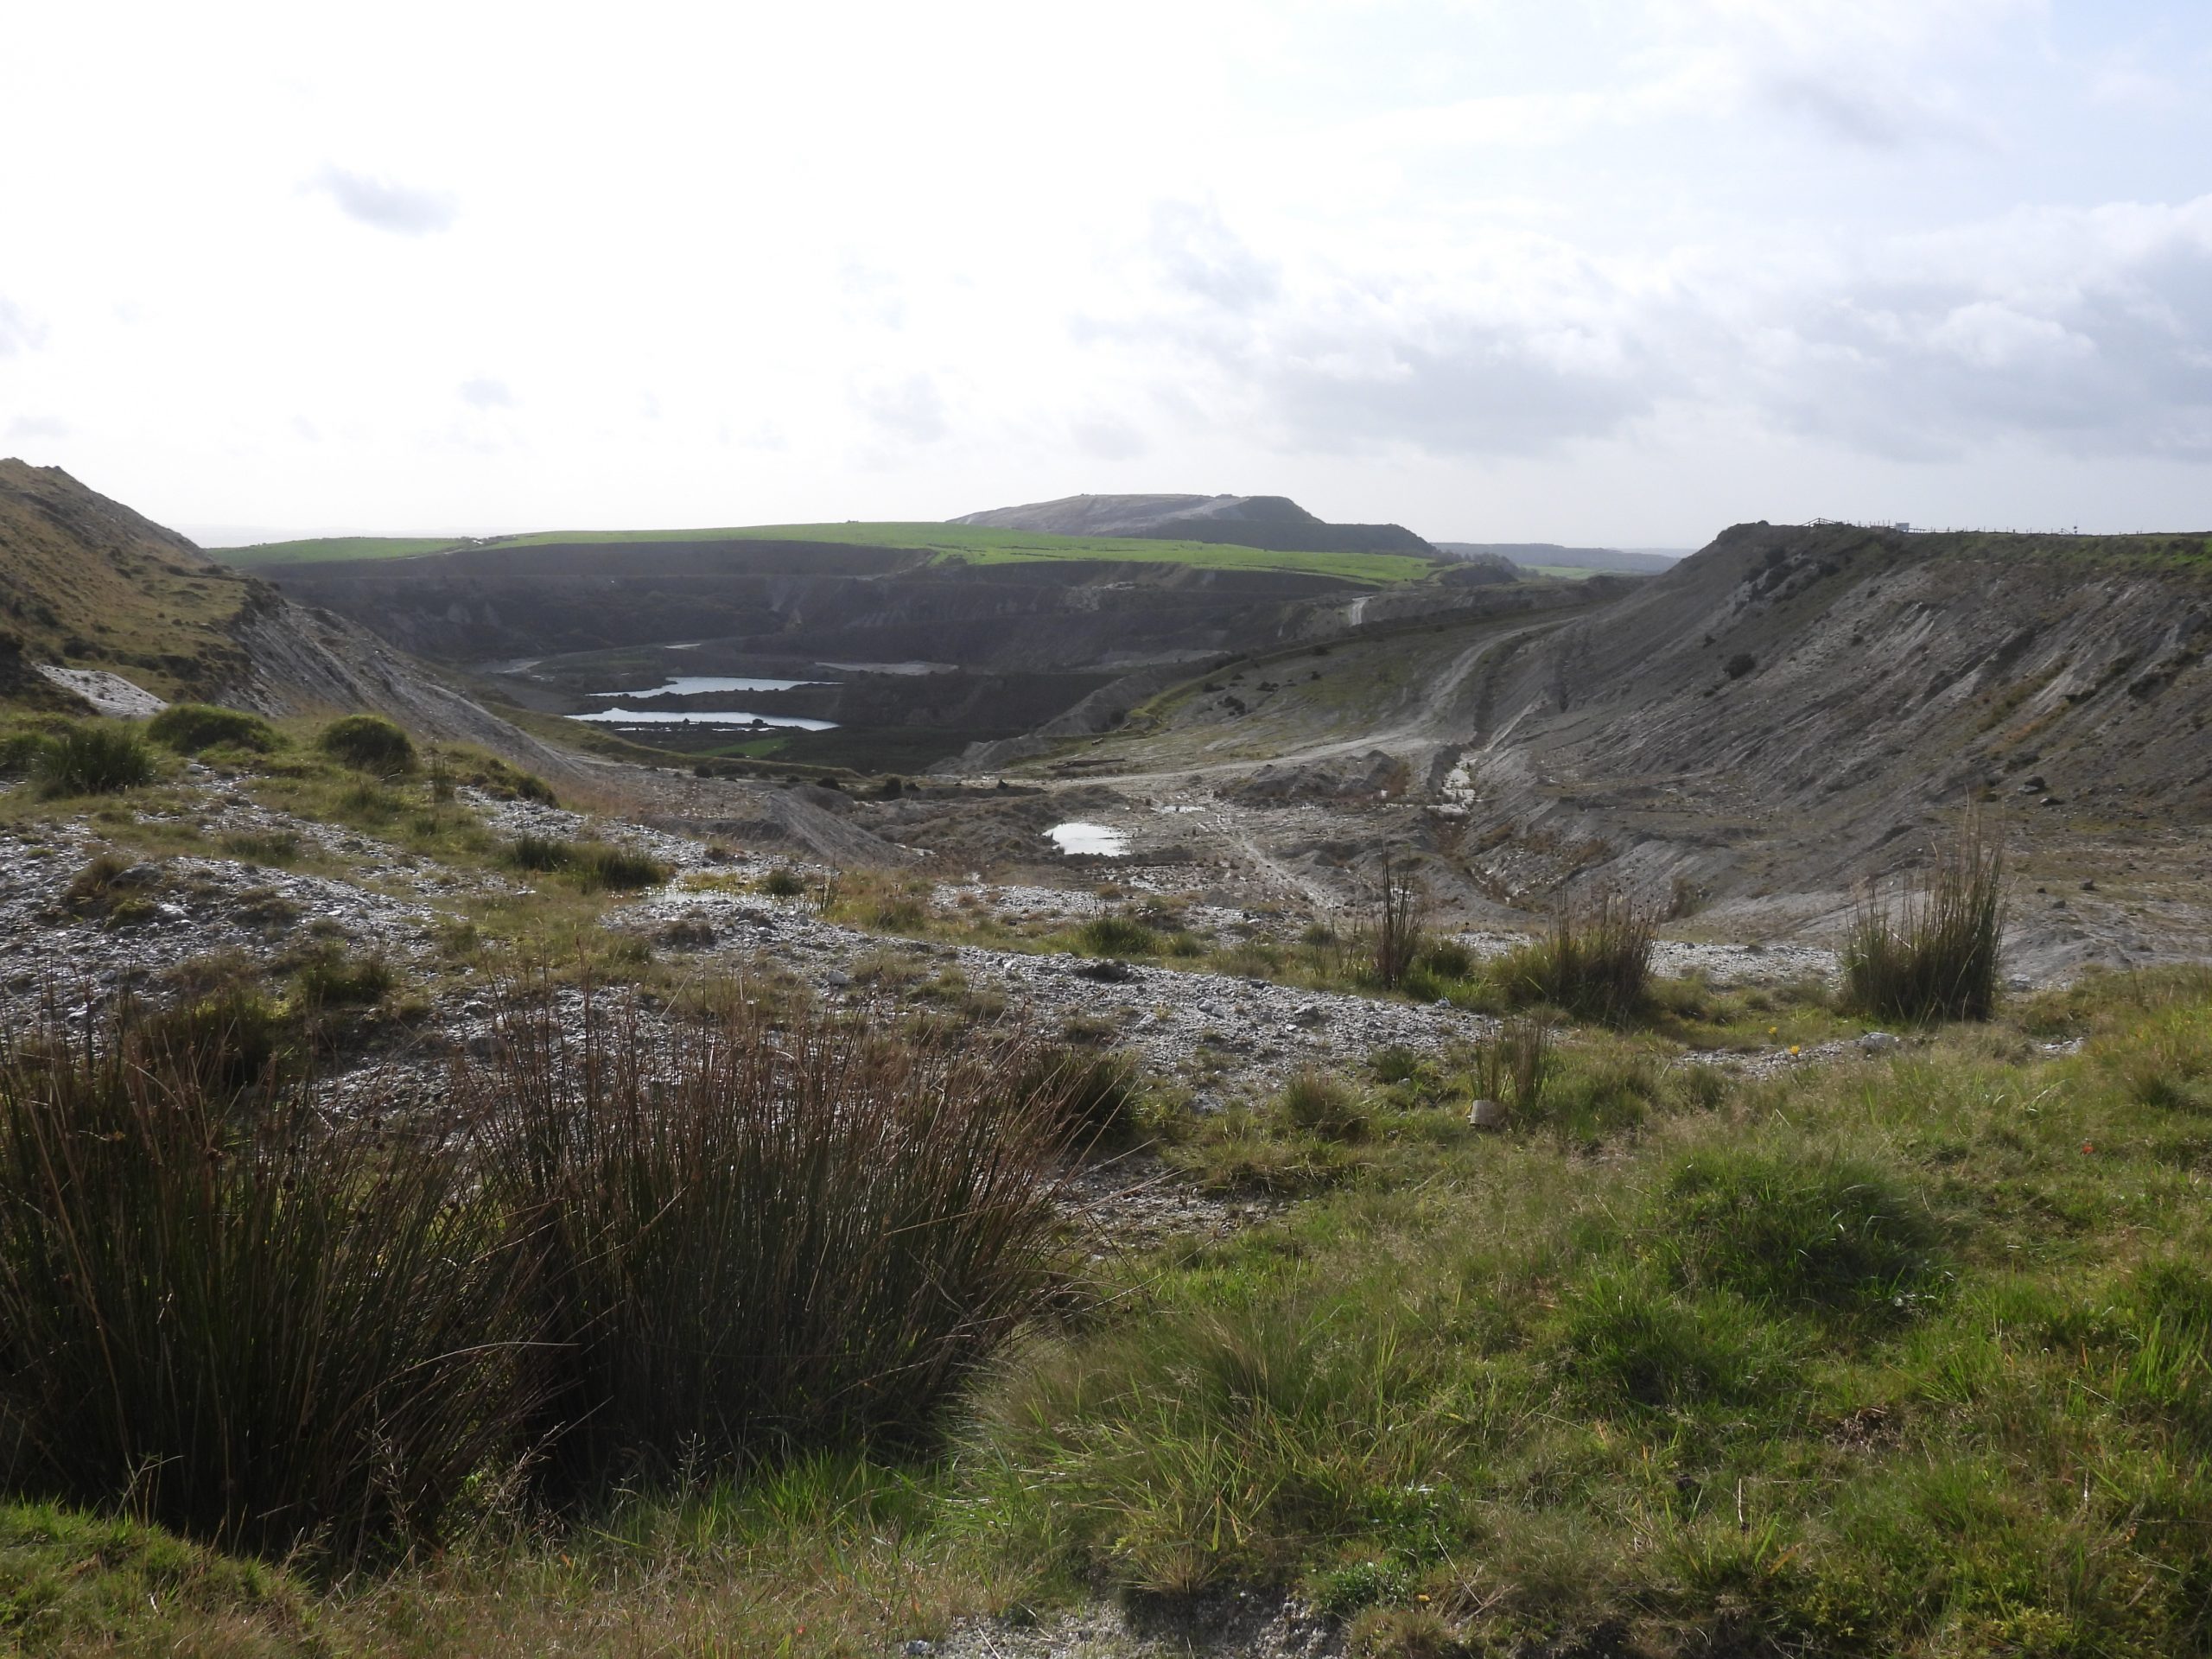 51. Clay Pits